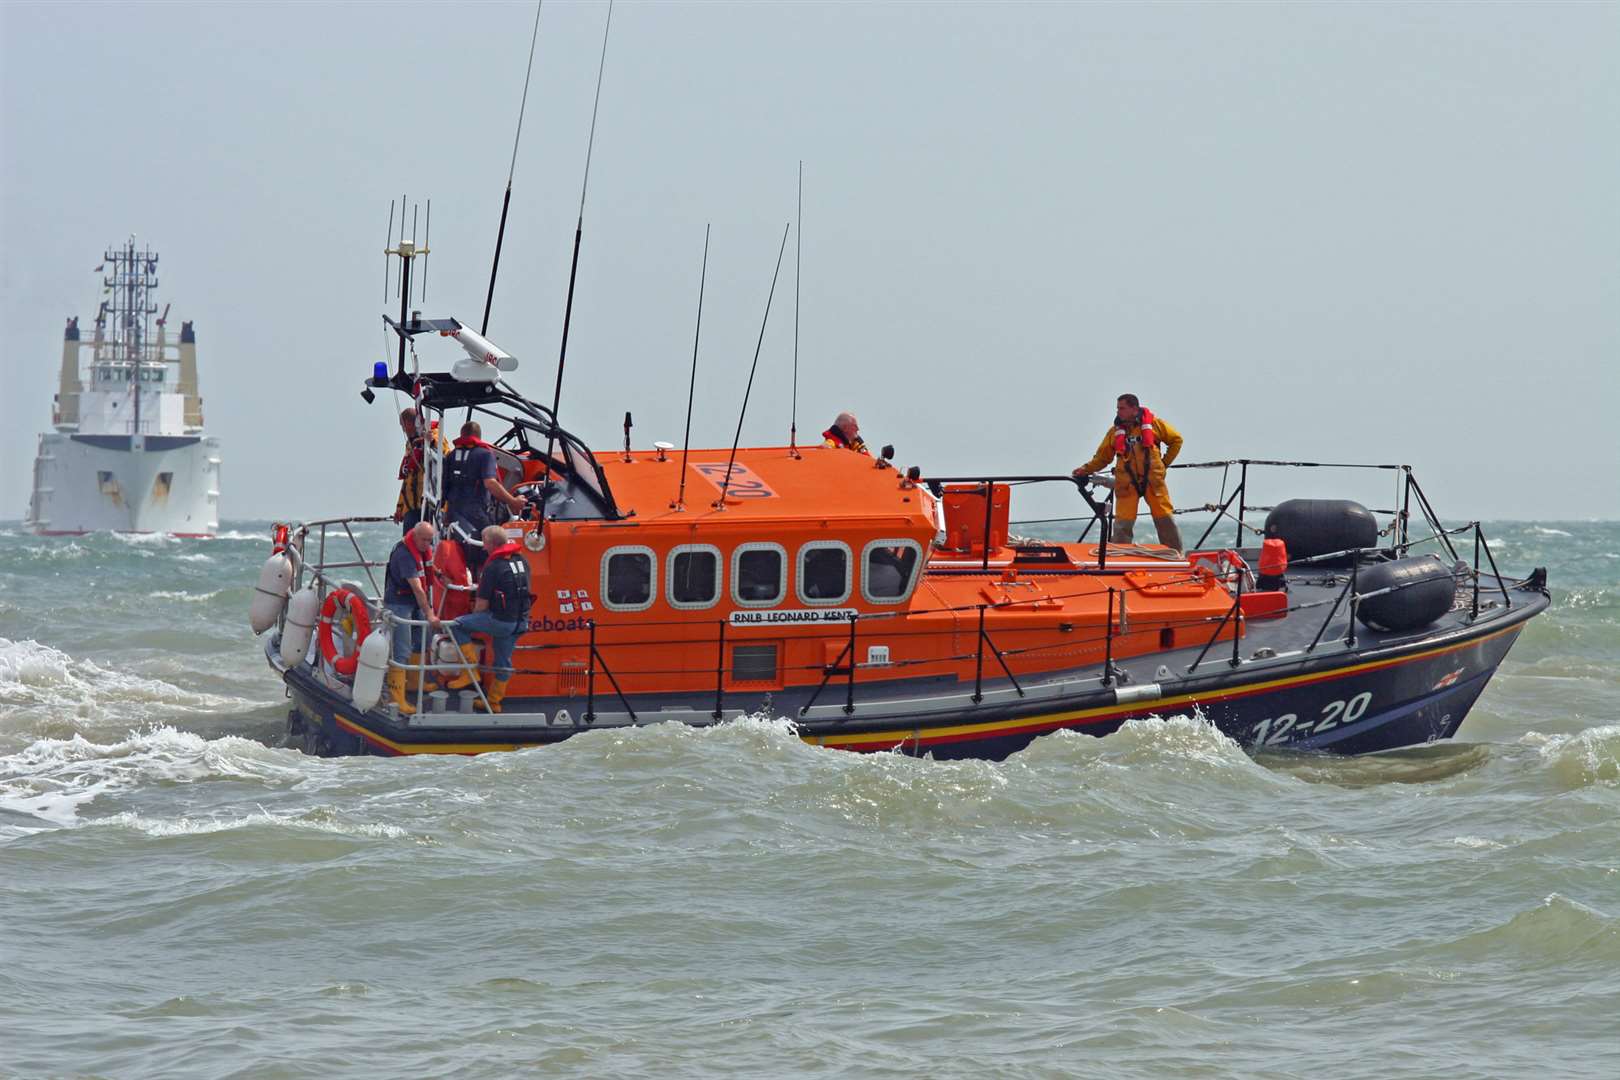 Margate RNLI all-weather lifeboat